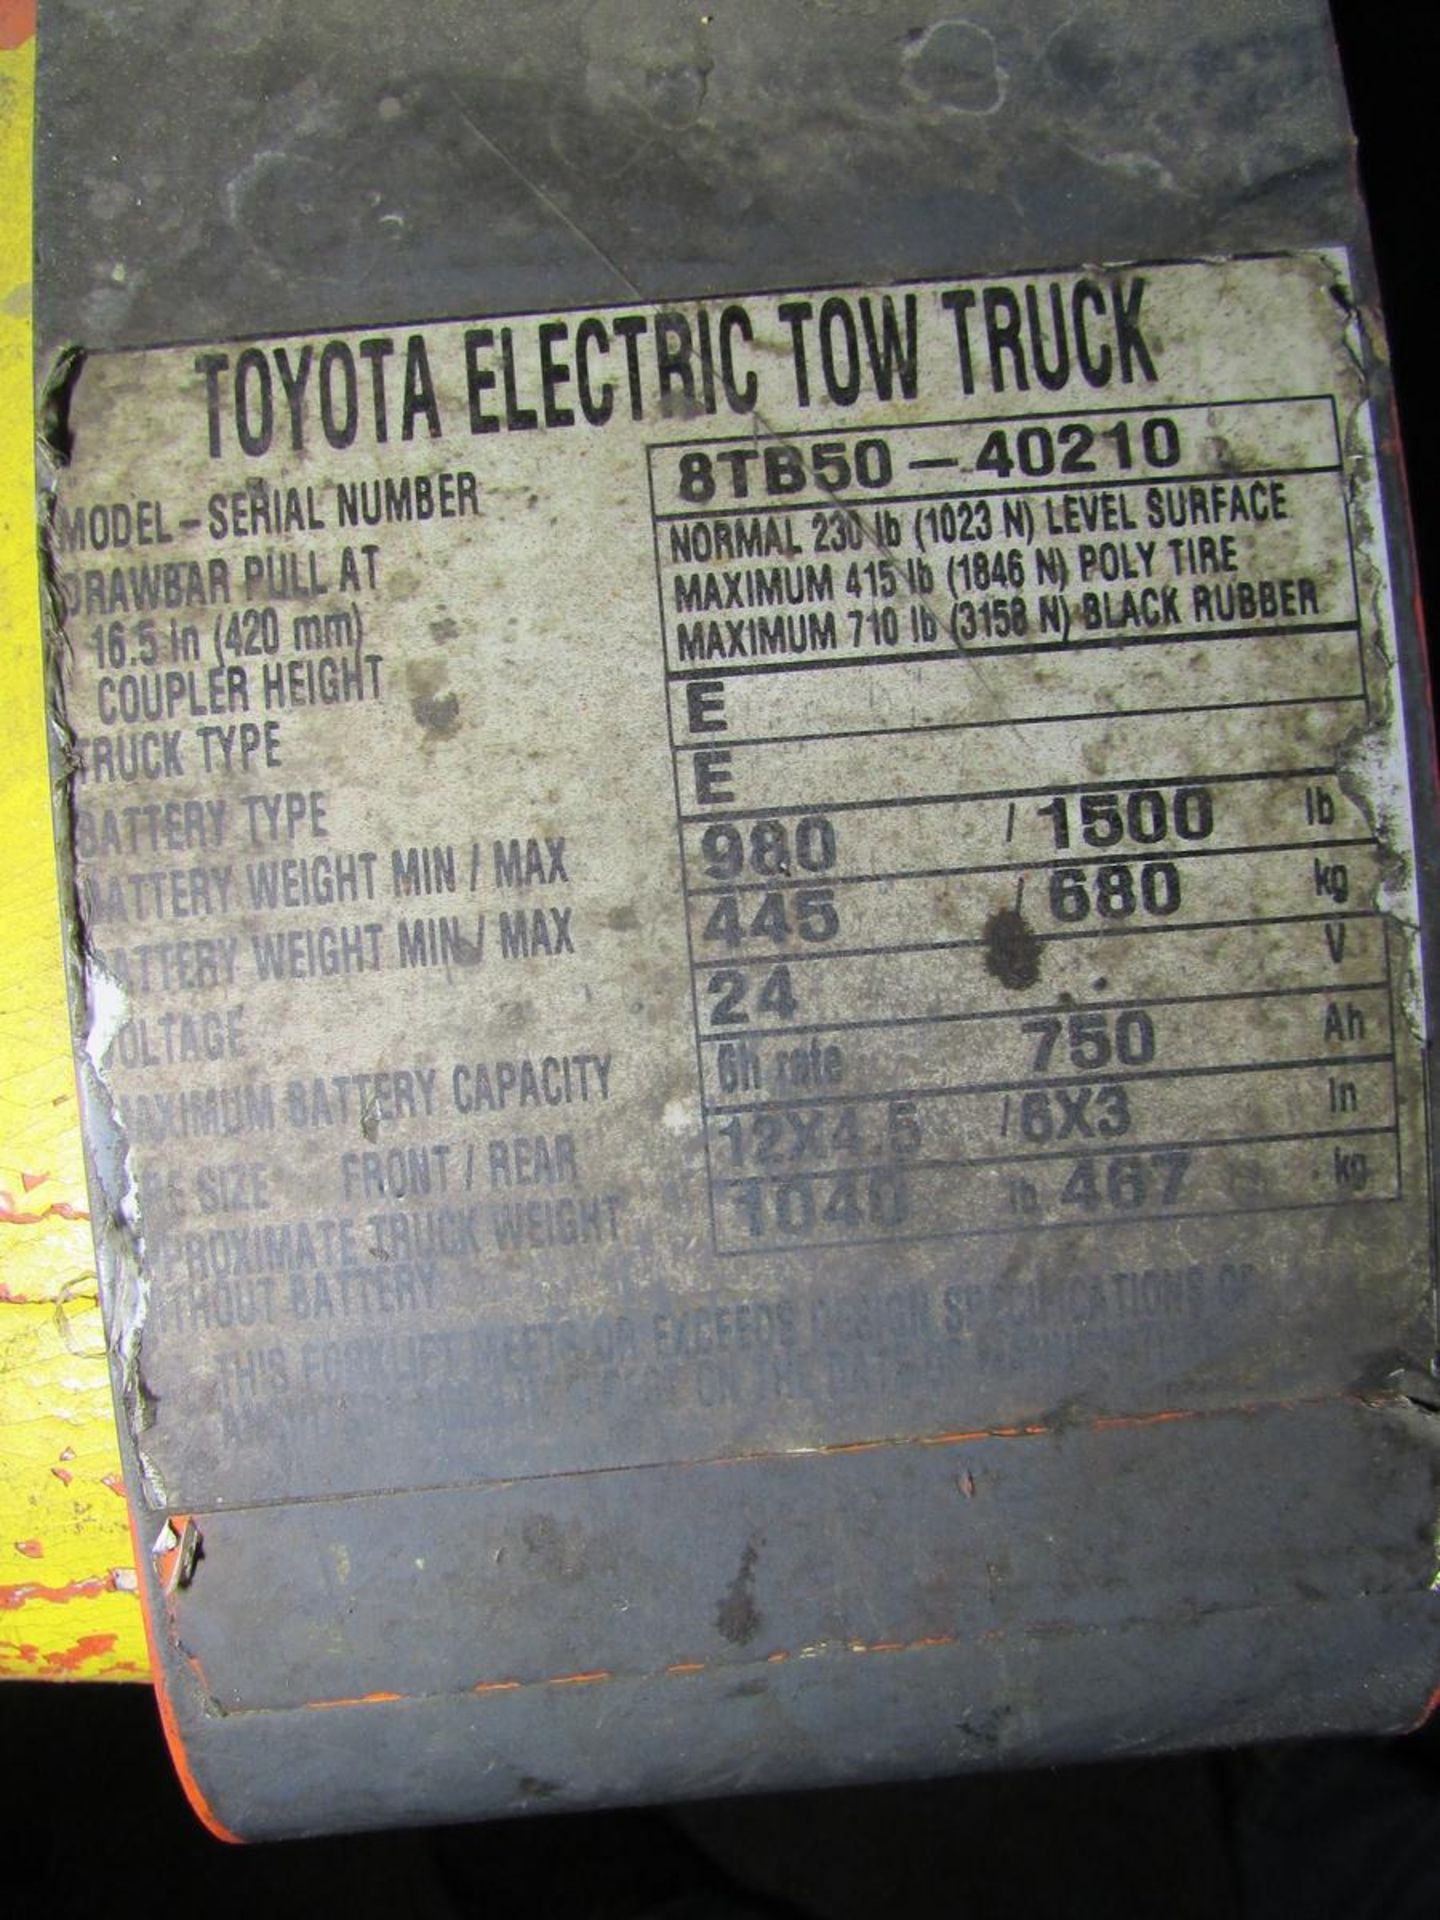 Toyota 8TB50 24V Electric Tugger Truck - Image 7 of 7